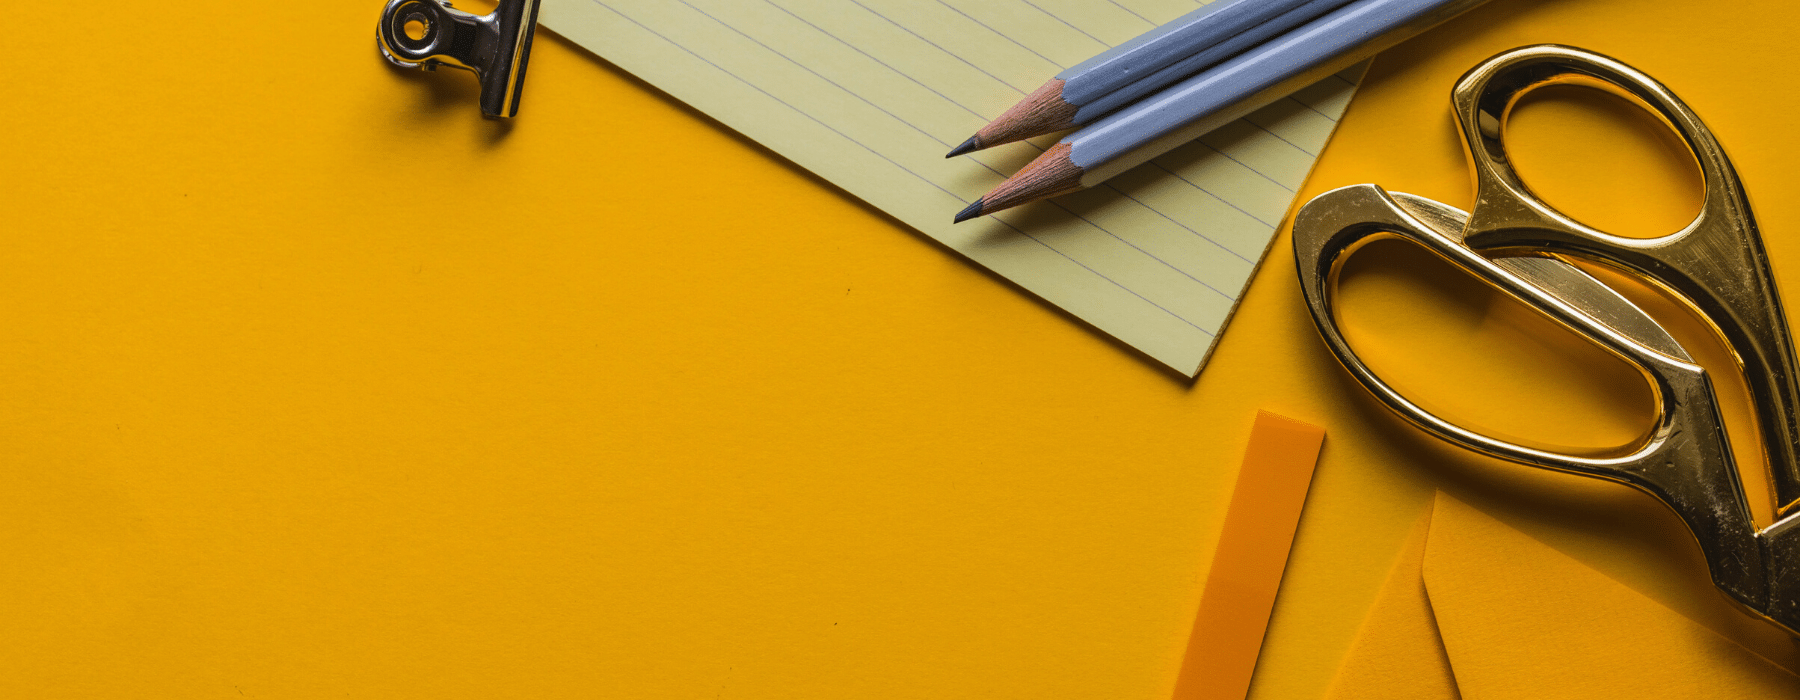 two pencils and scissors in orange background